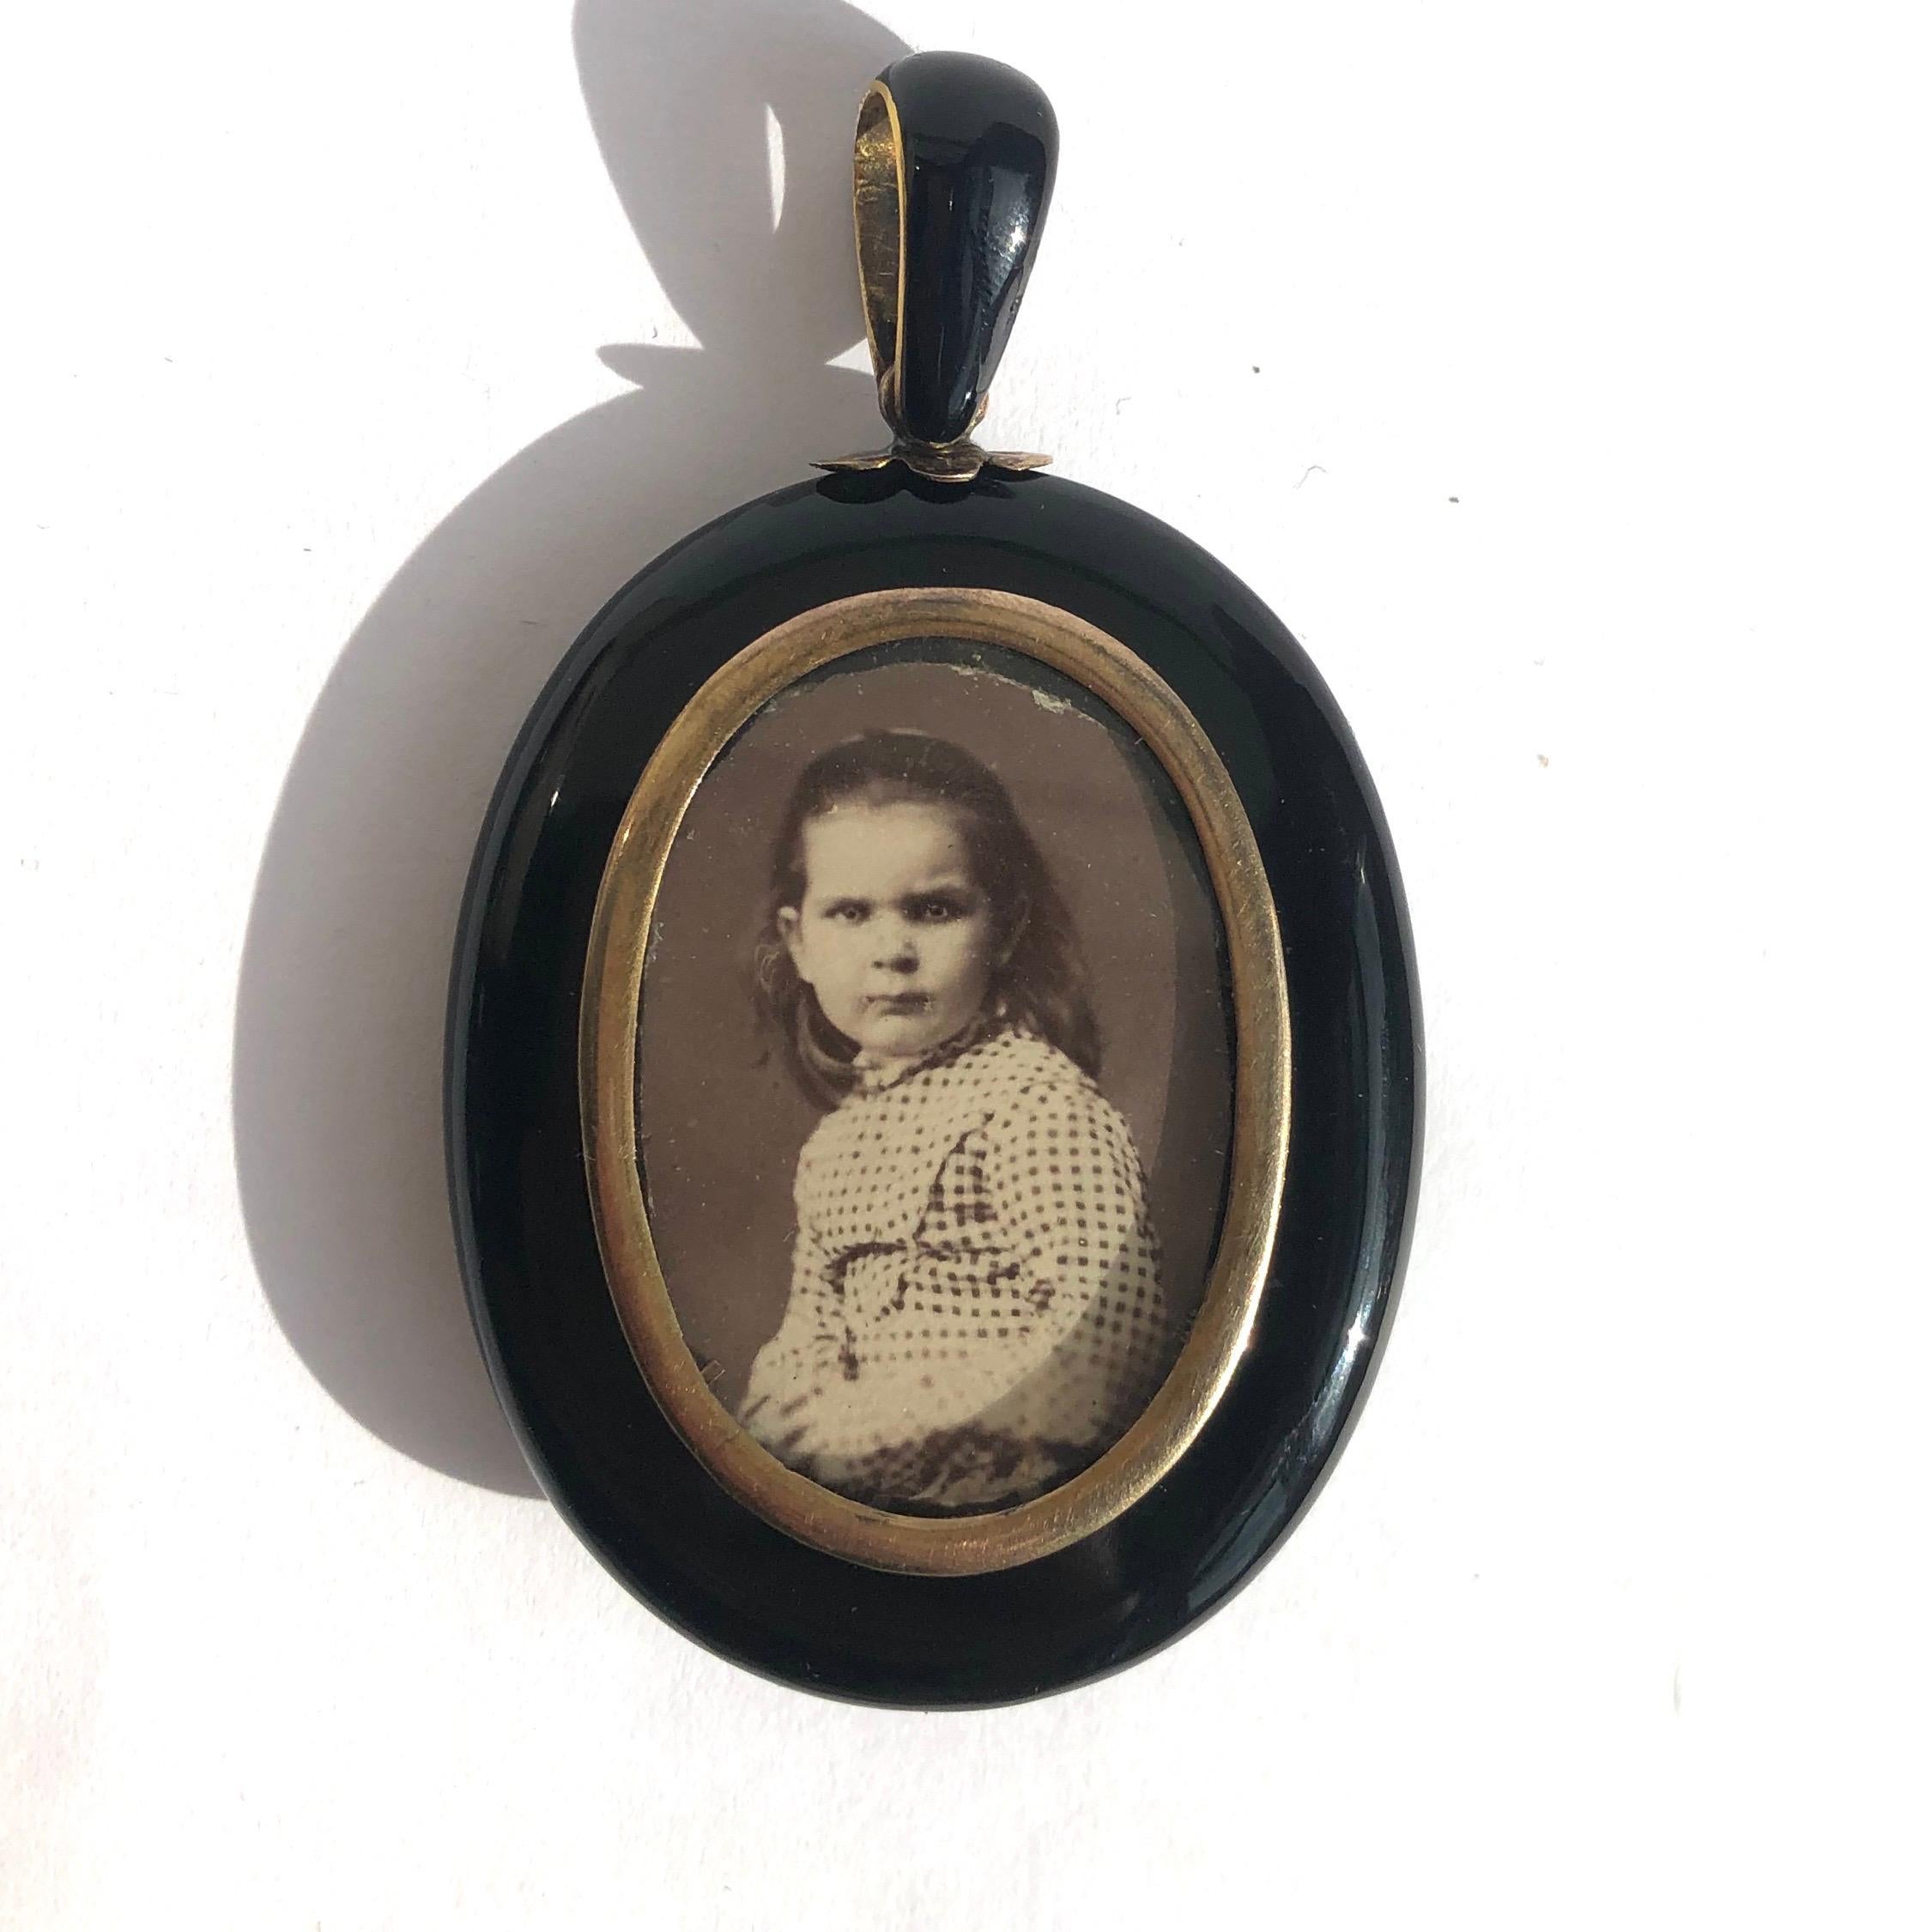 The size of this locket makes this piece a real show stopper. The glossy black Onyx with the gold central star encrusted with pearls is fabulous! In the glazed panel on the back of this locket is a picture of a sweet little girl in a gold frame.